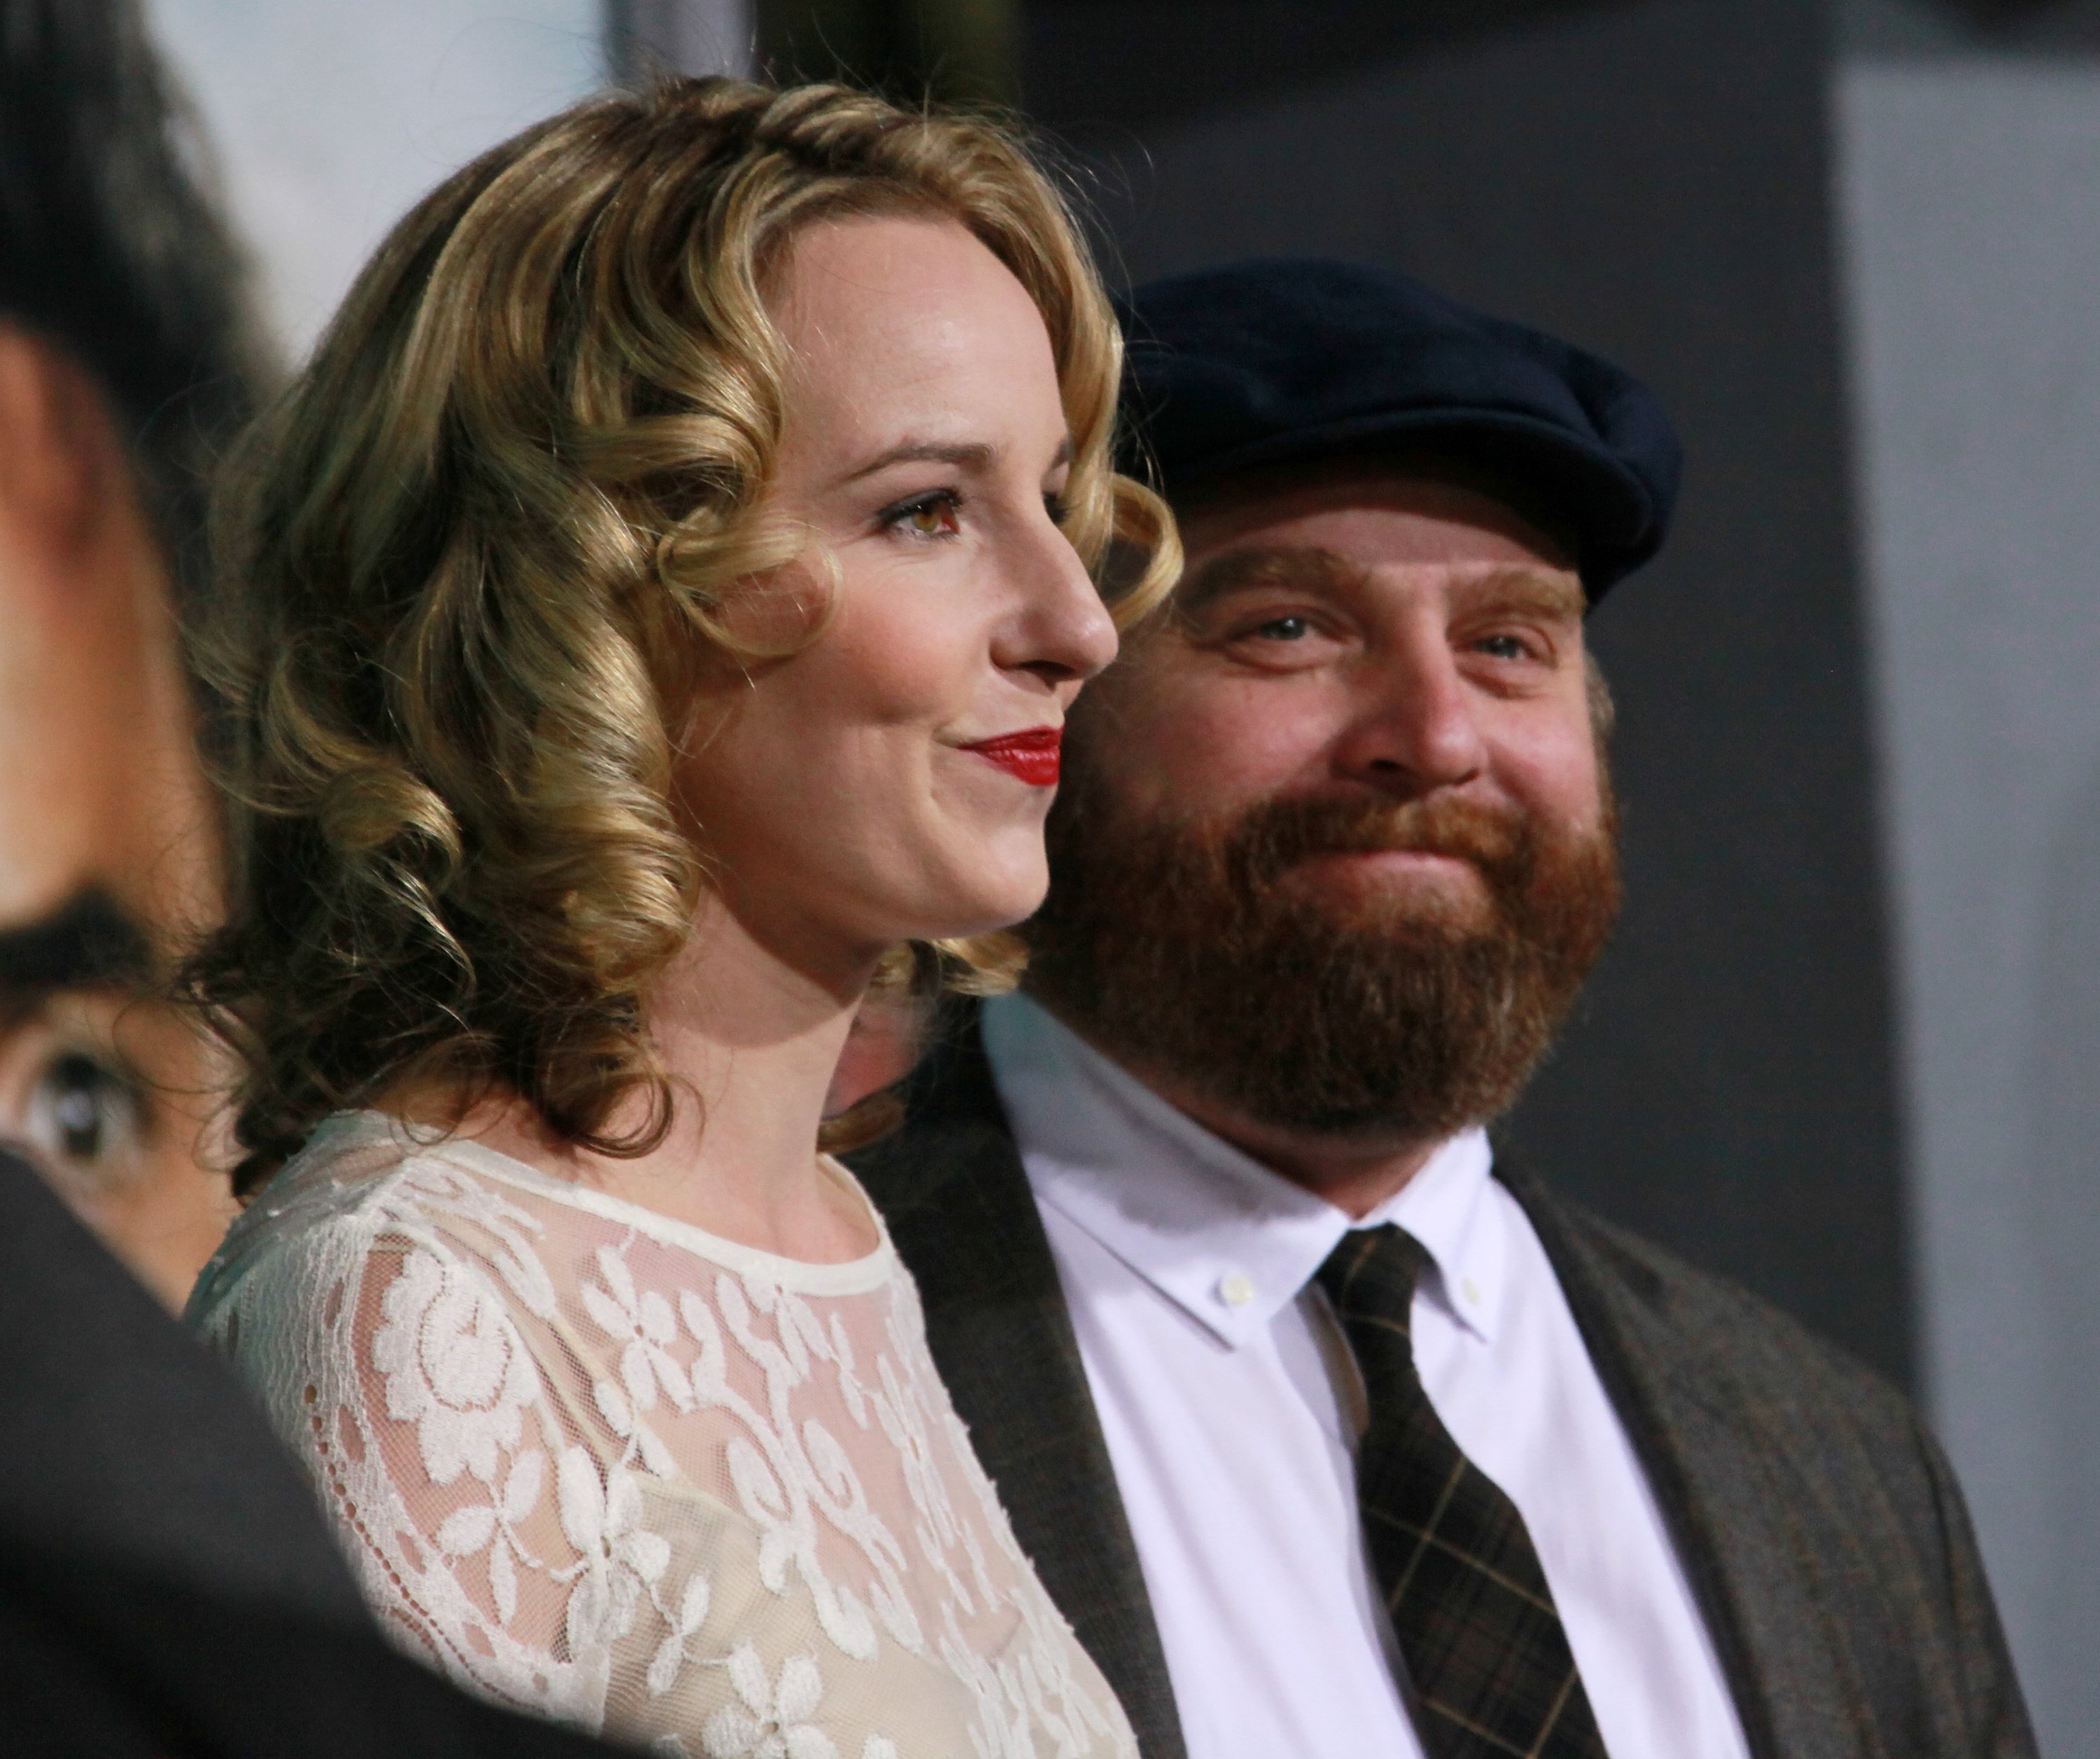 Zach Galifianakis Skipped Movie Premiere To Be With Pregnant Wife — They Wed In 30 Min Ceremony